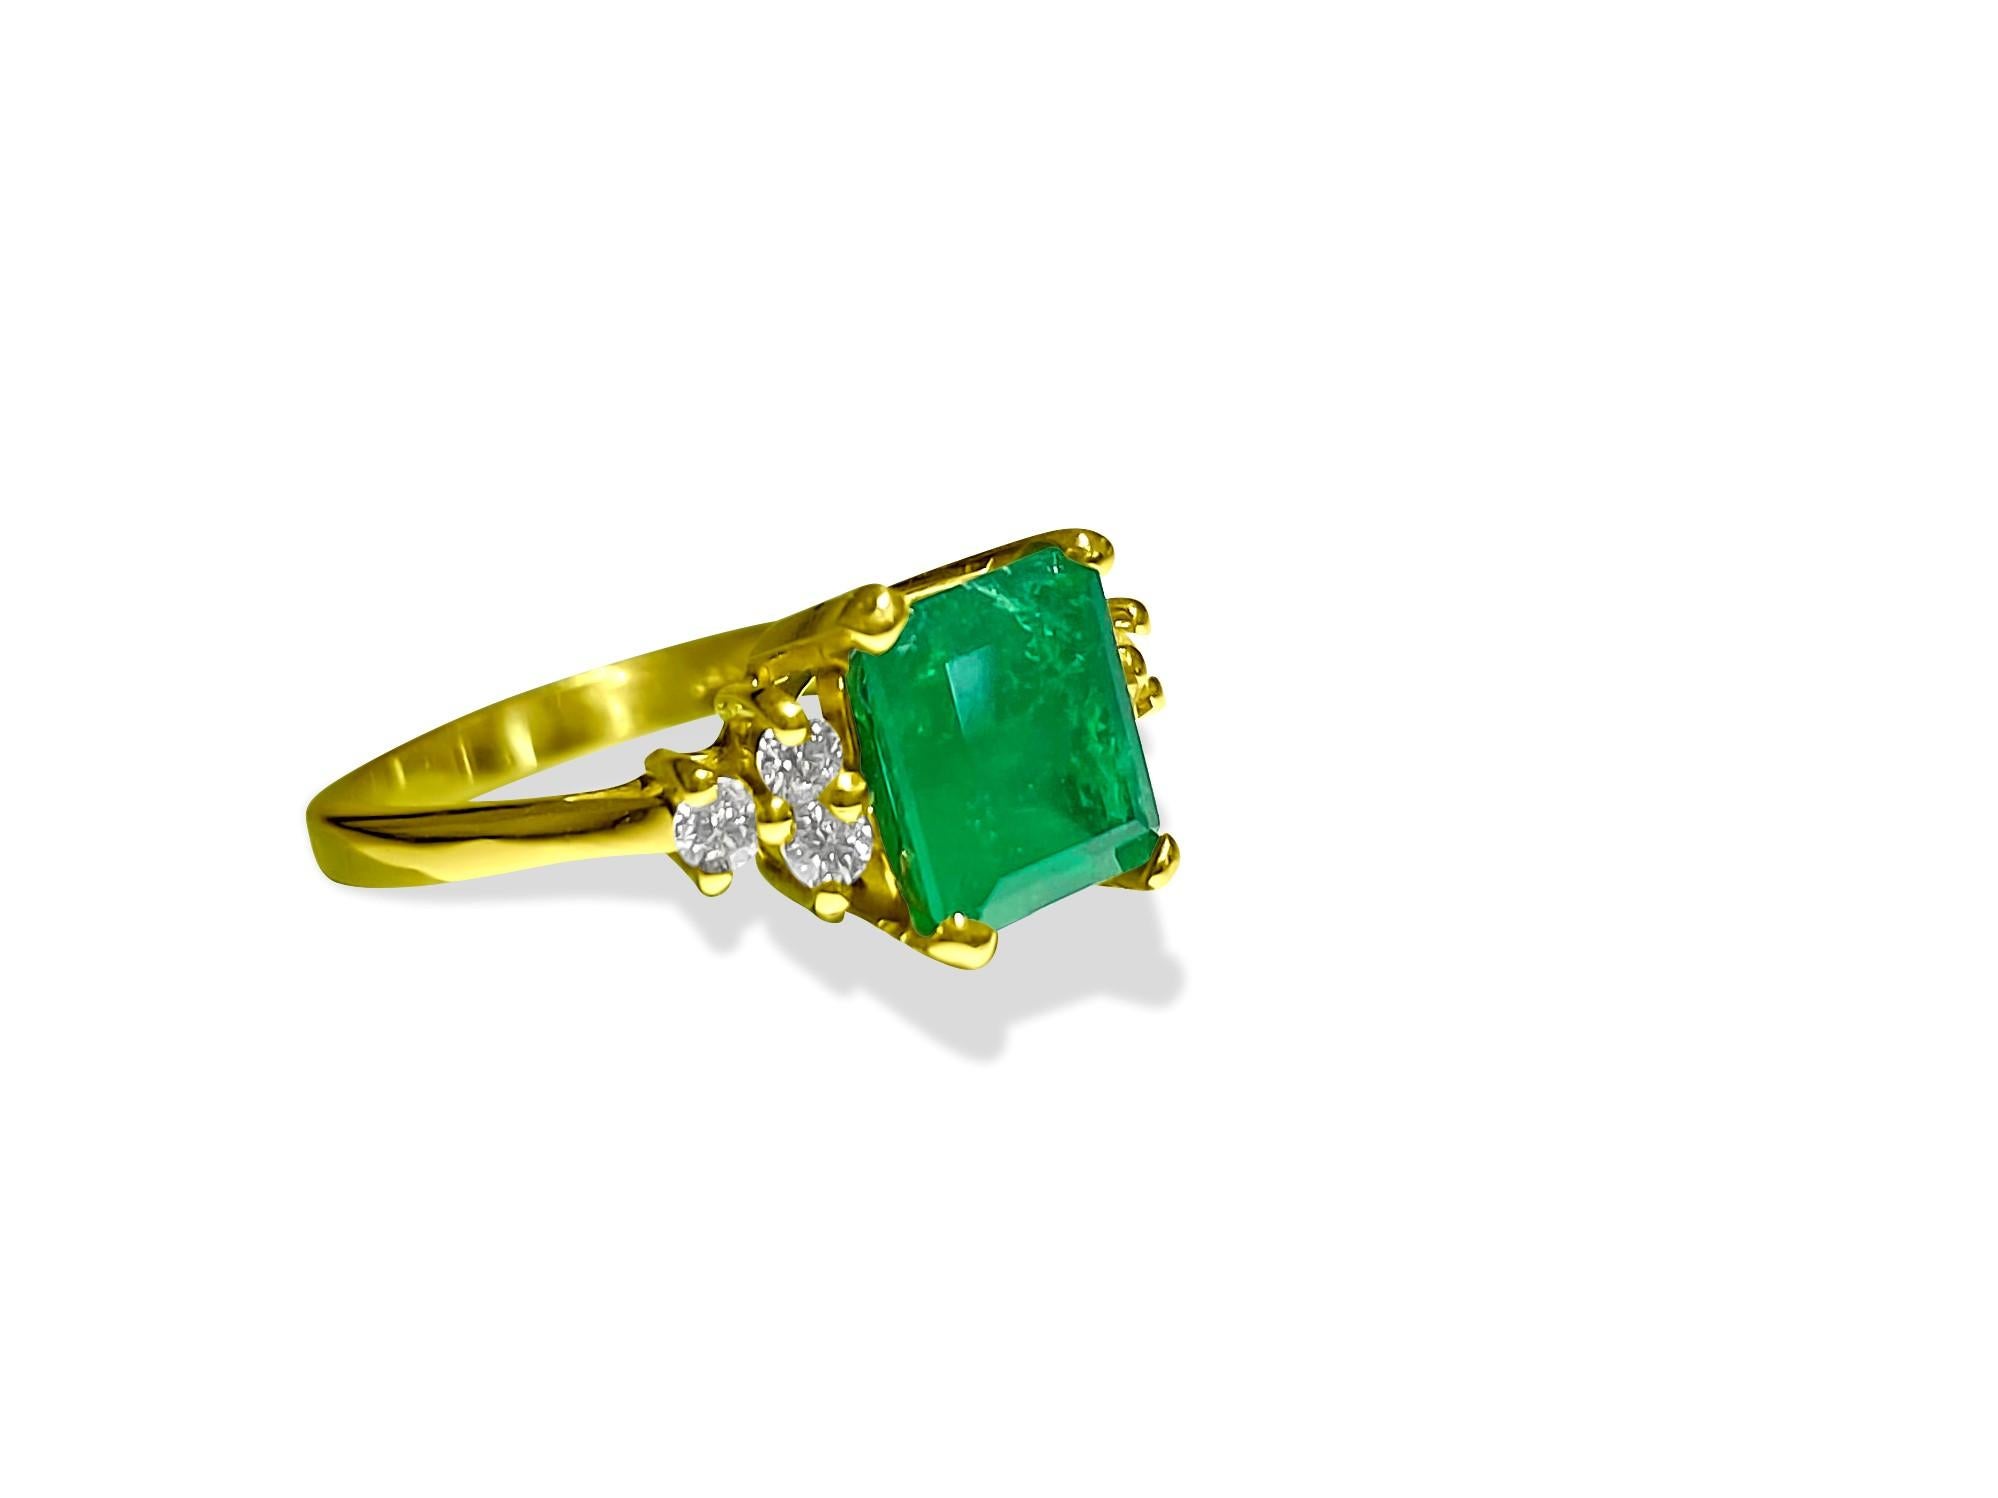 Metal: 14K yellow gold. 

100% natural earth mined Emerald. Princess cut emerald, 2.50 carats. Round brilliant cut diamonds, VS clarity and G color. All gemstones in prong setting. Extremely beautiful ring. Classic vintage finish. Beautiful emerald